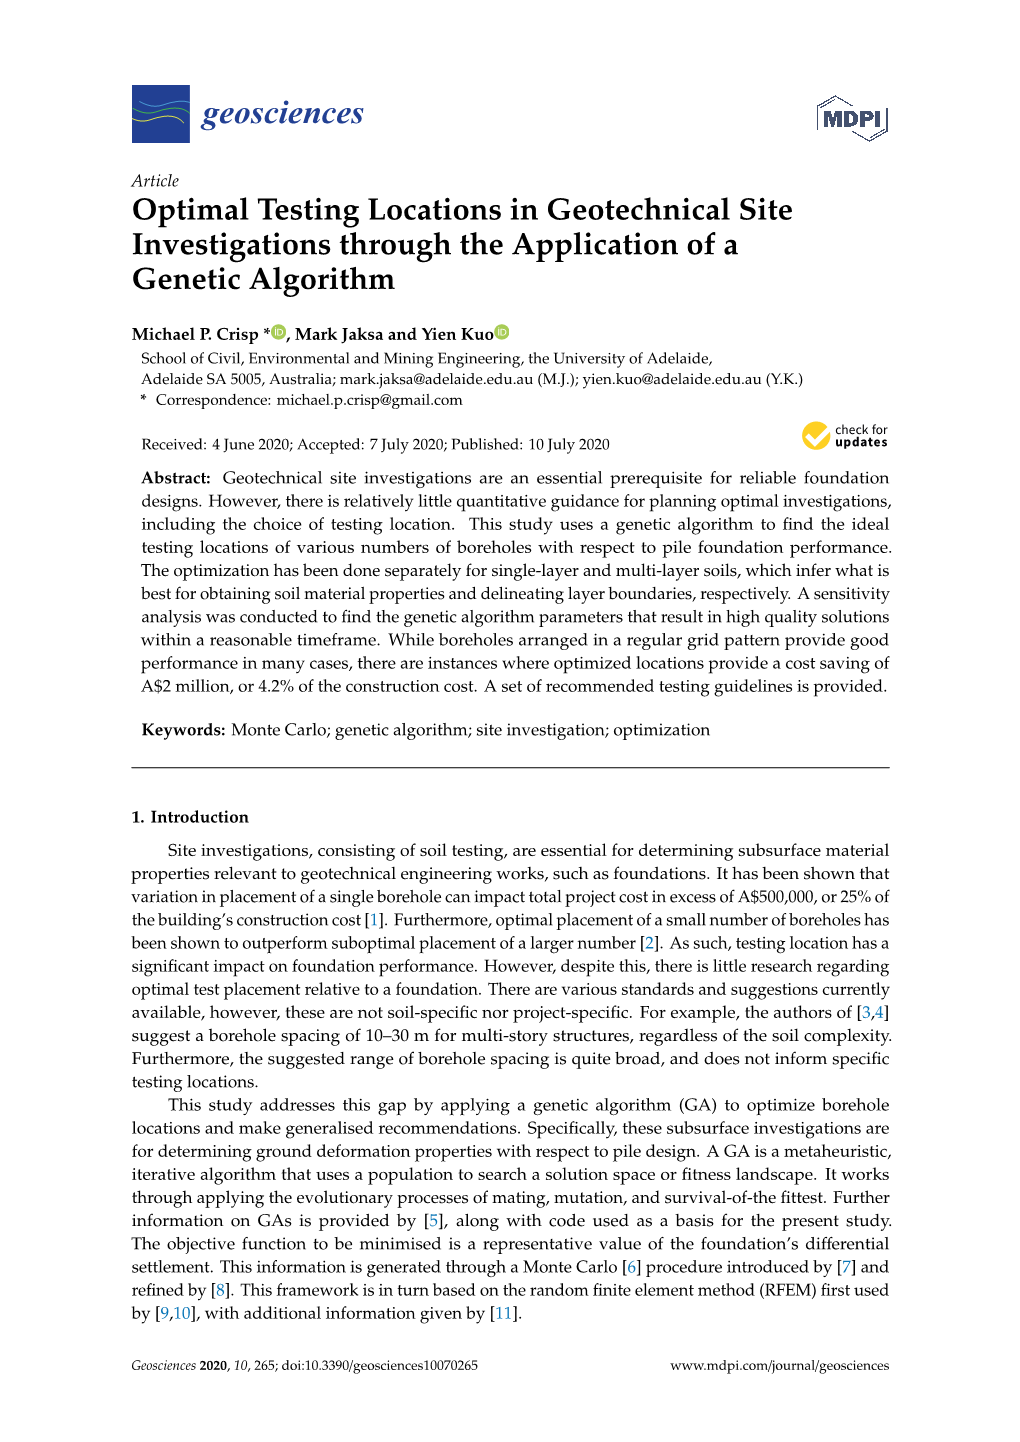 Optimal Testing Locations in Geotechnical Site Investigations Through the Application of a Genetic Algorithm